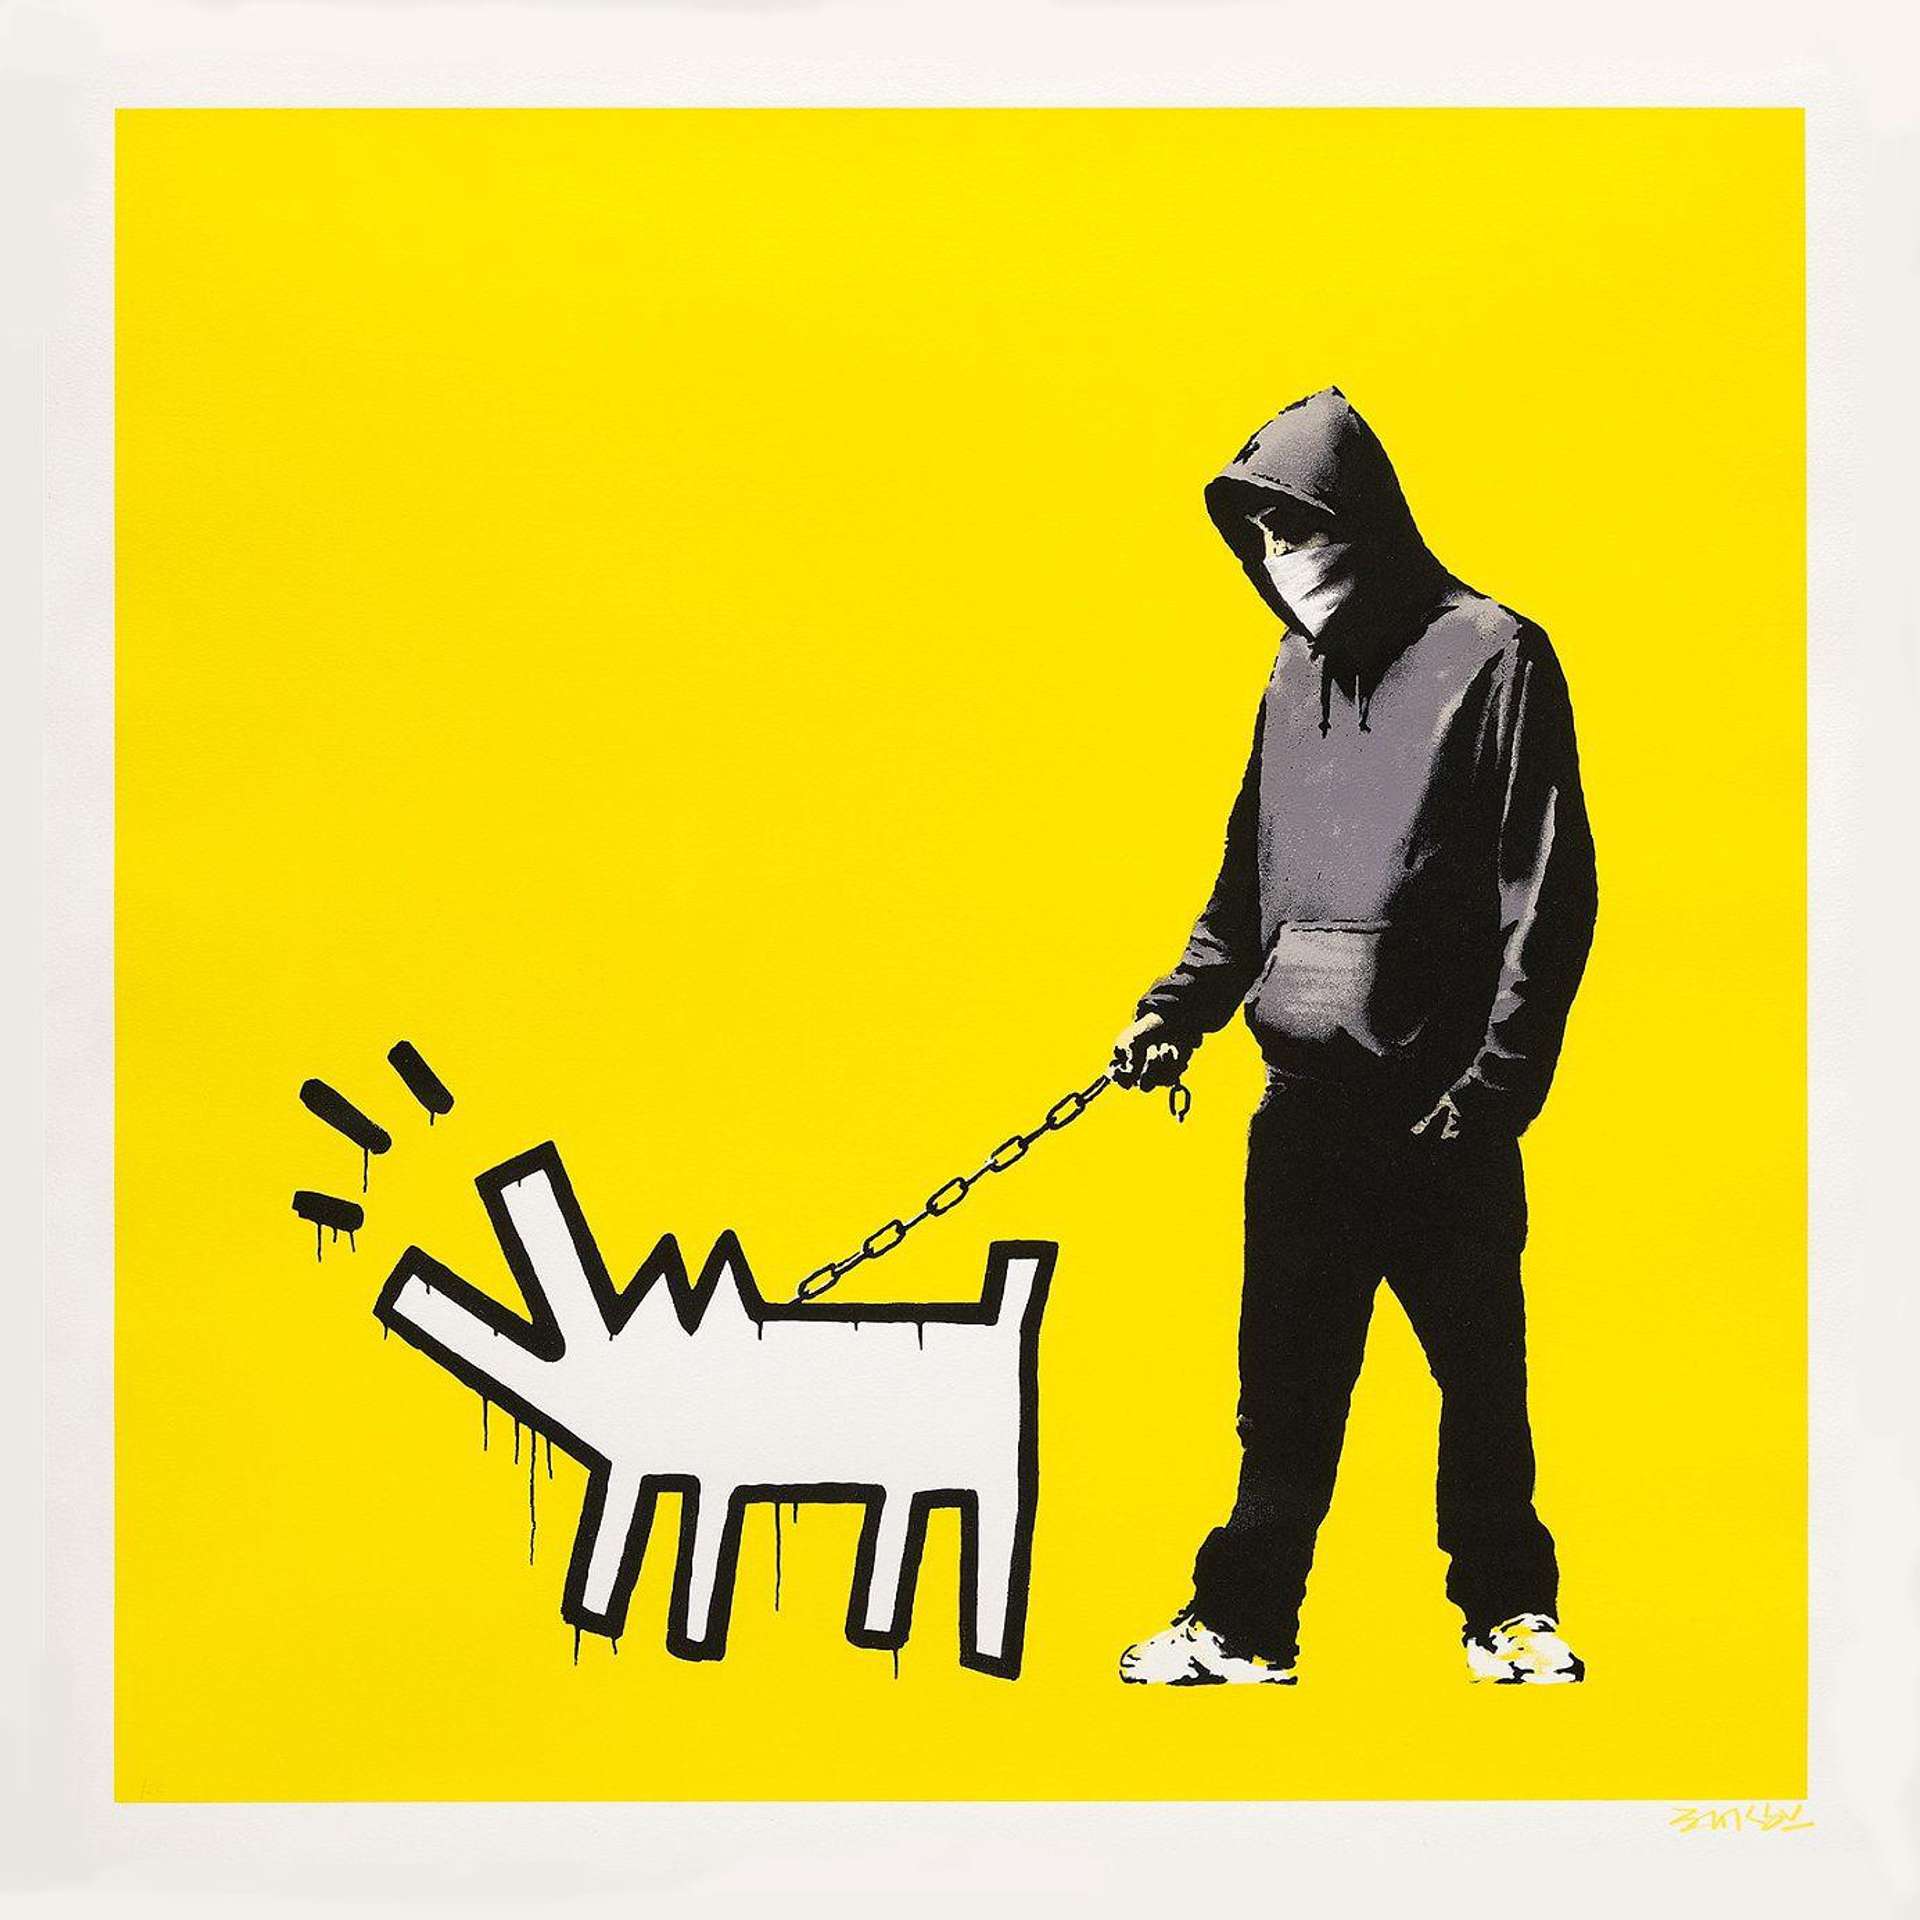 A young man wearing denim and an oversized hooded sweatshirt, with a bandana covering his face and his hood pulled up, stands in a wide stance. He has one hand in his pocket and holds a cartoon barking dog on a chain leash. The artwork is set against a vibrant yellow background.